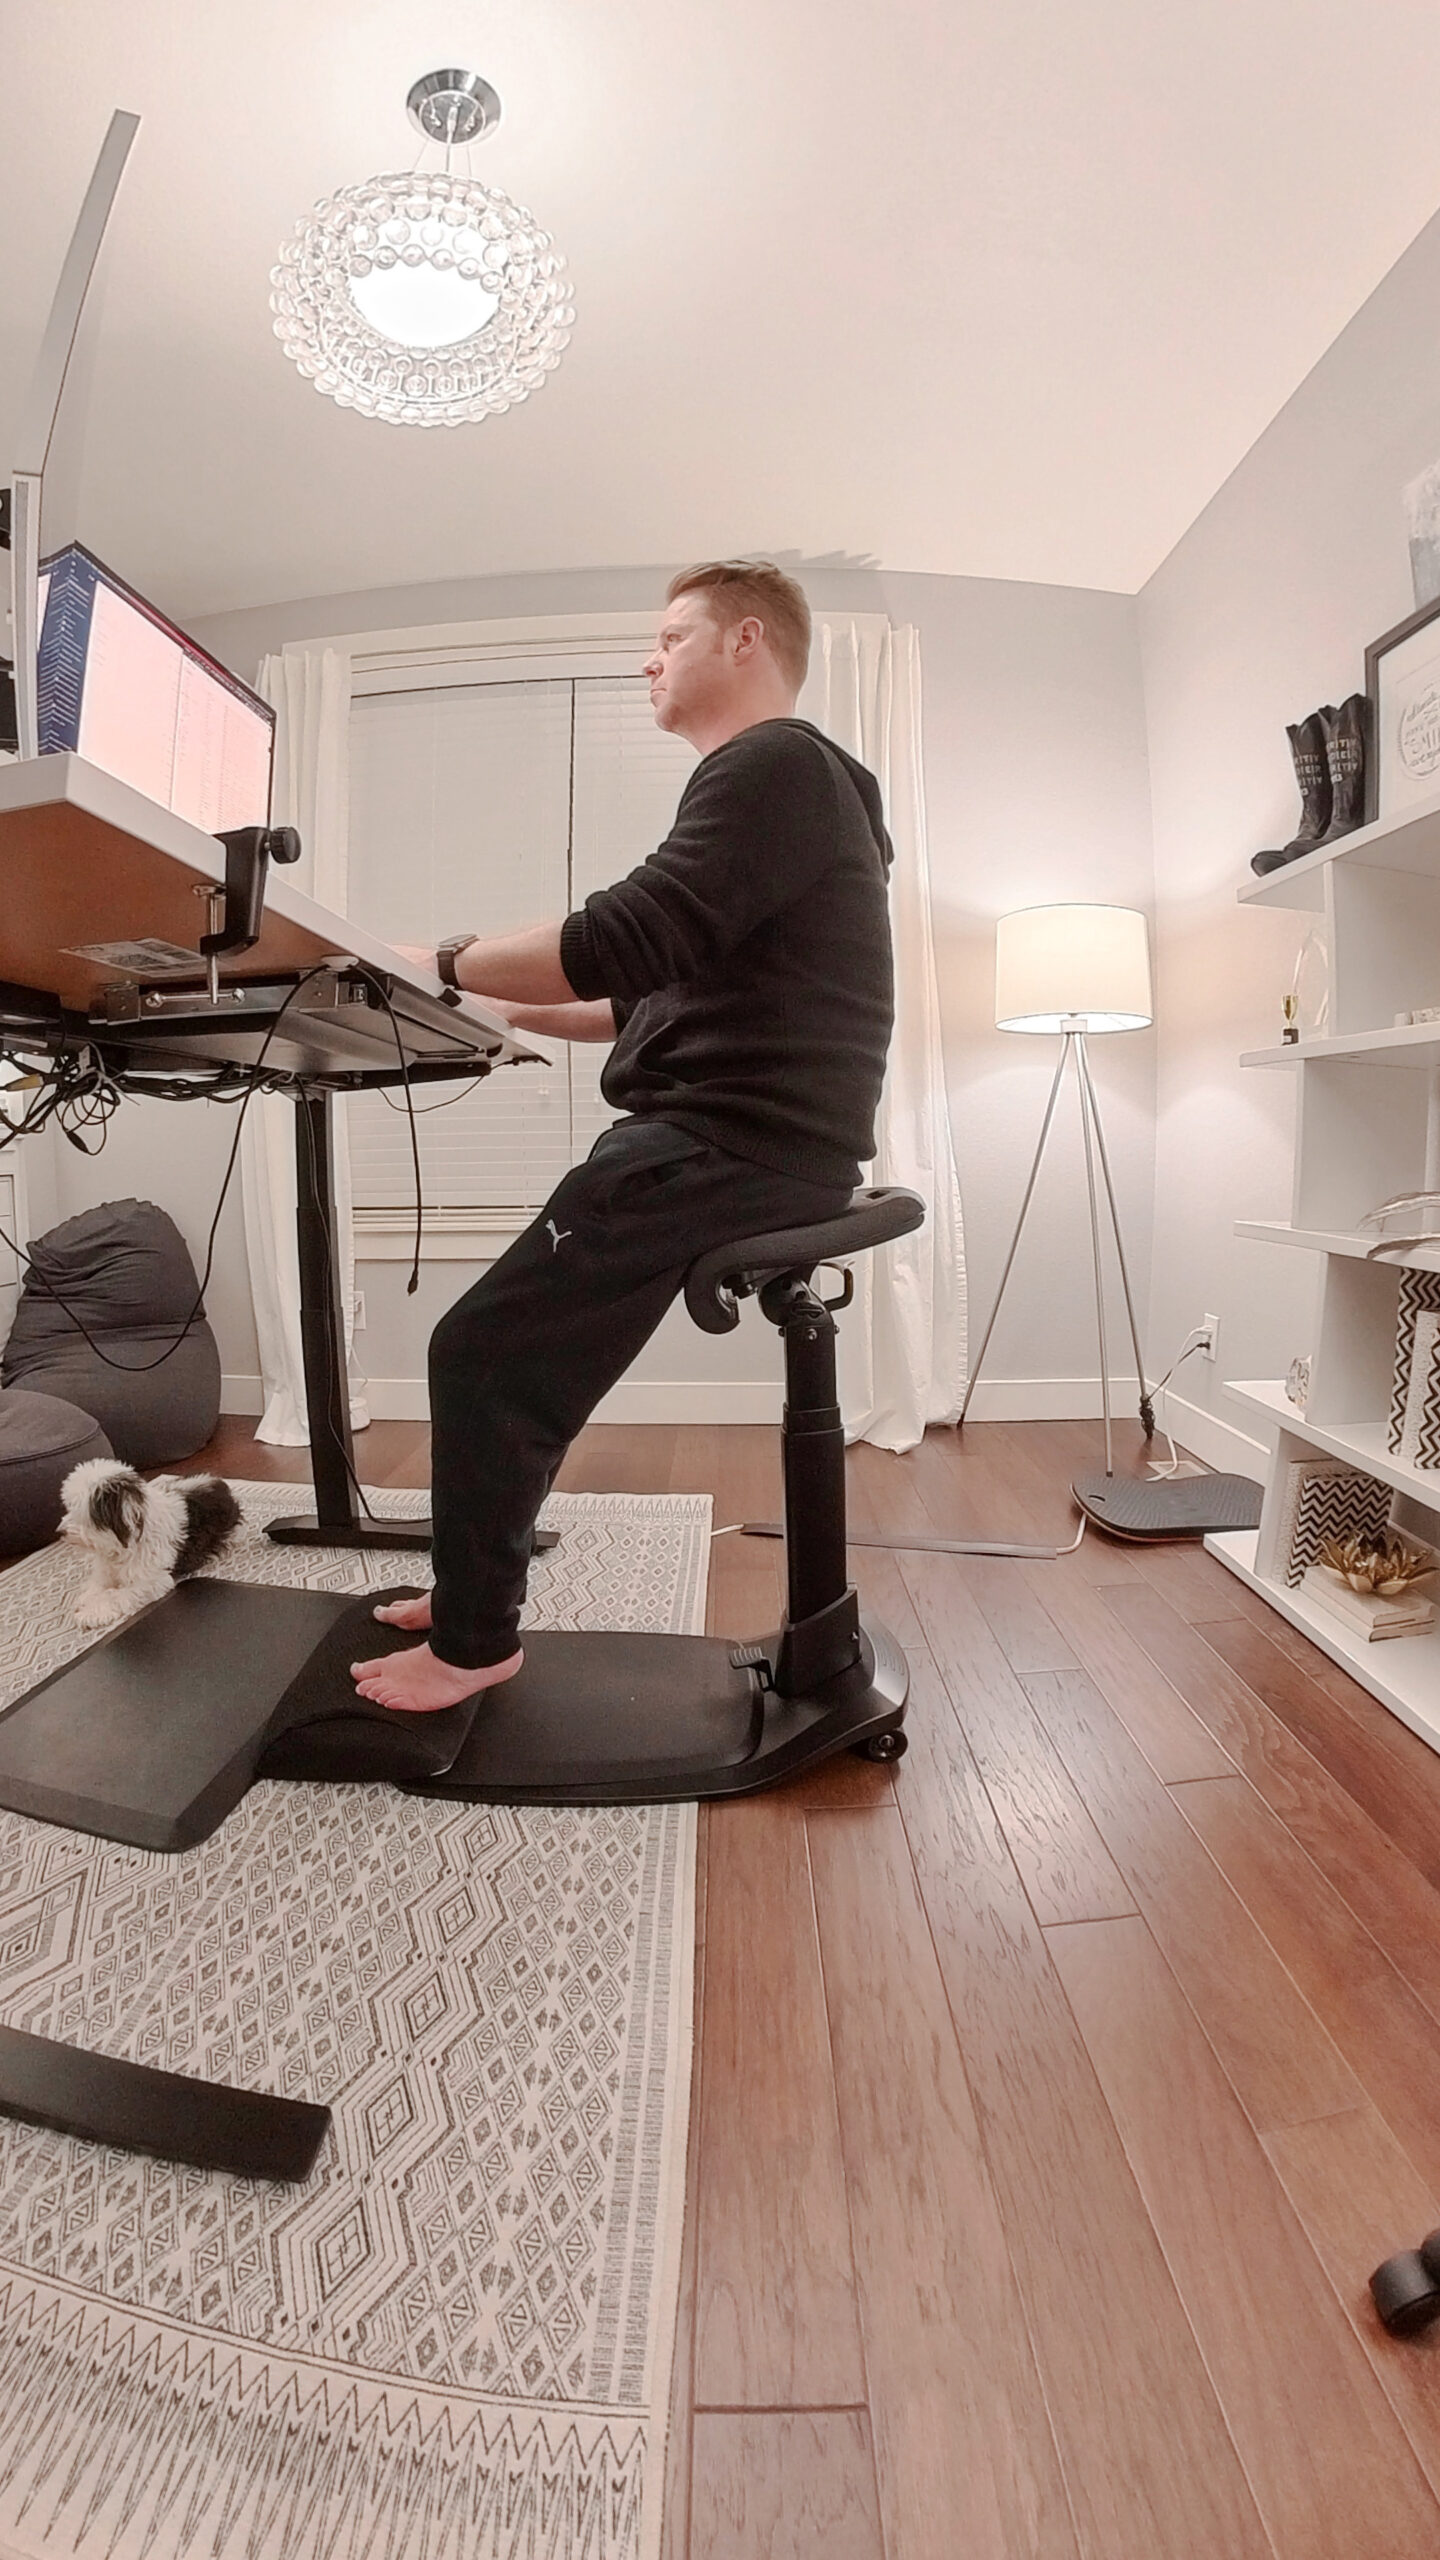 You can also use the LeanRite as a standard sitting stool for your standing desk. This is also pretty straightforward.